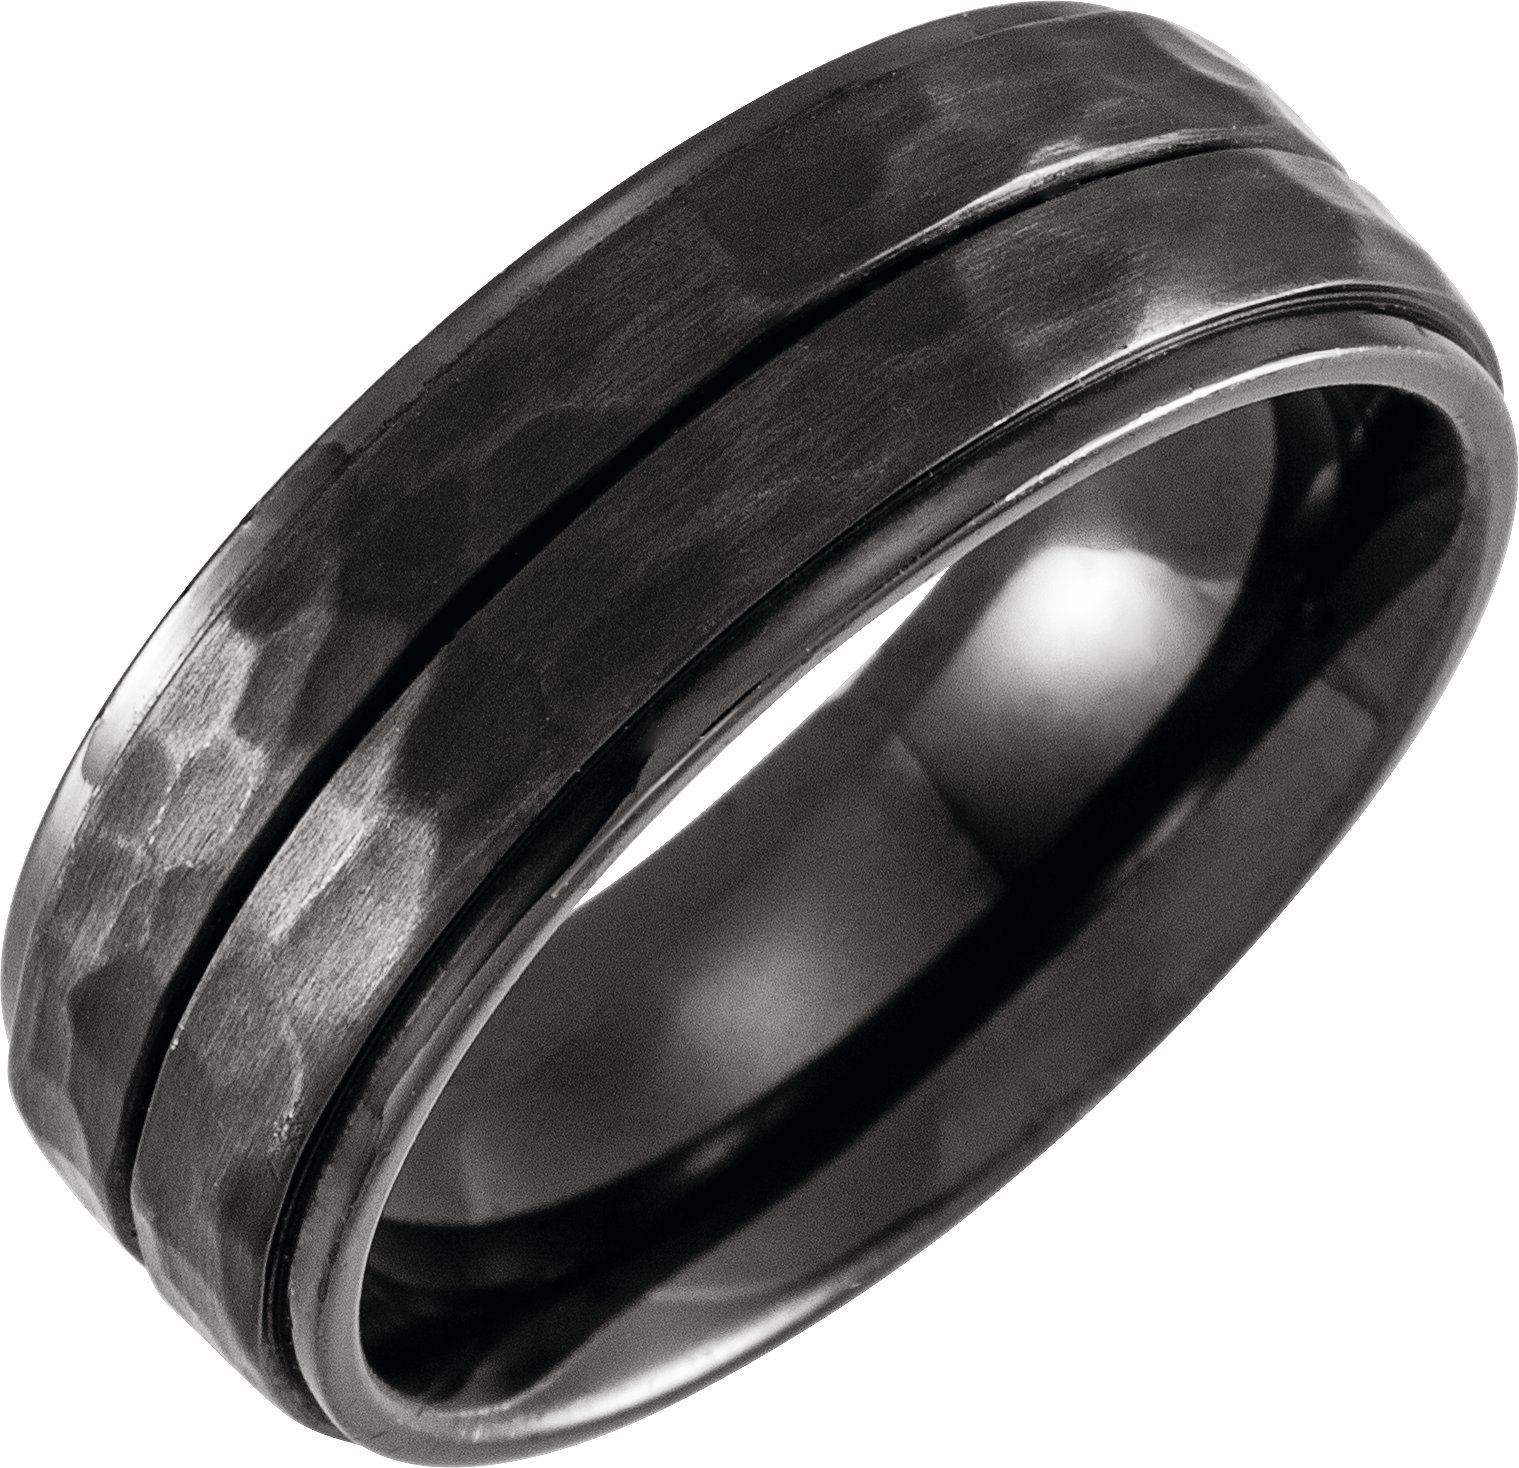 Black Titanium 8 mm Flat Grooved Stepped Hammered Band Size 8.5